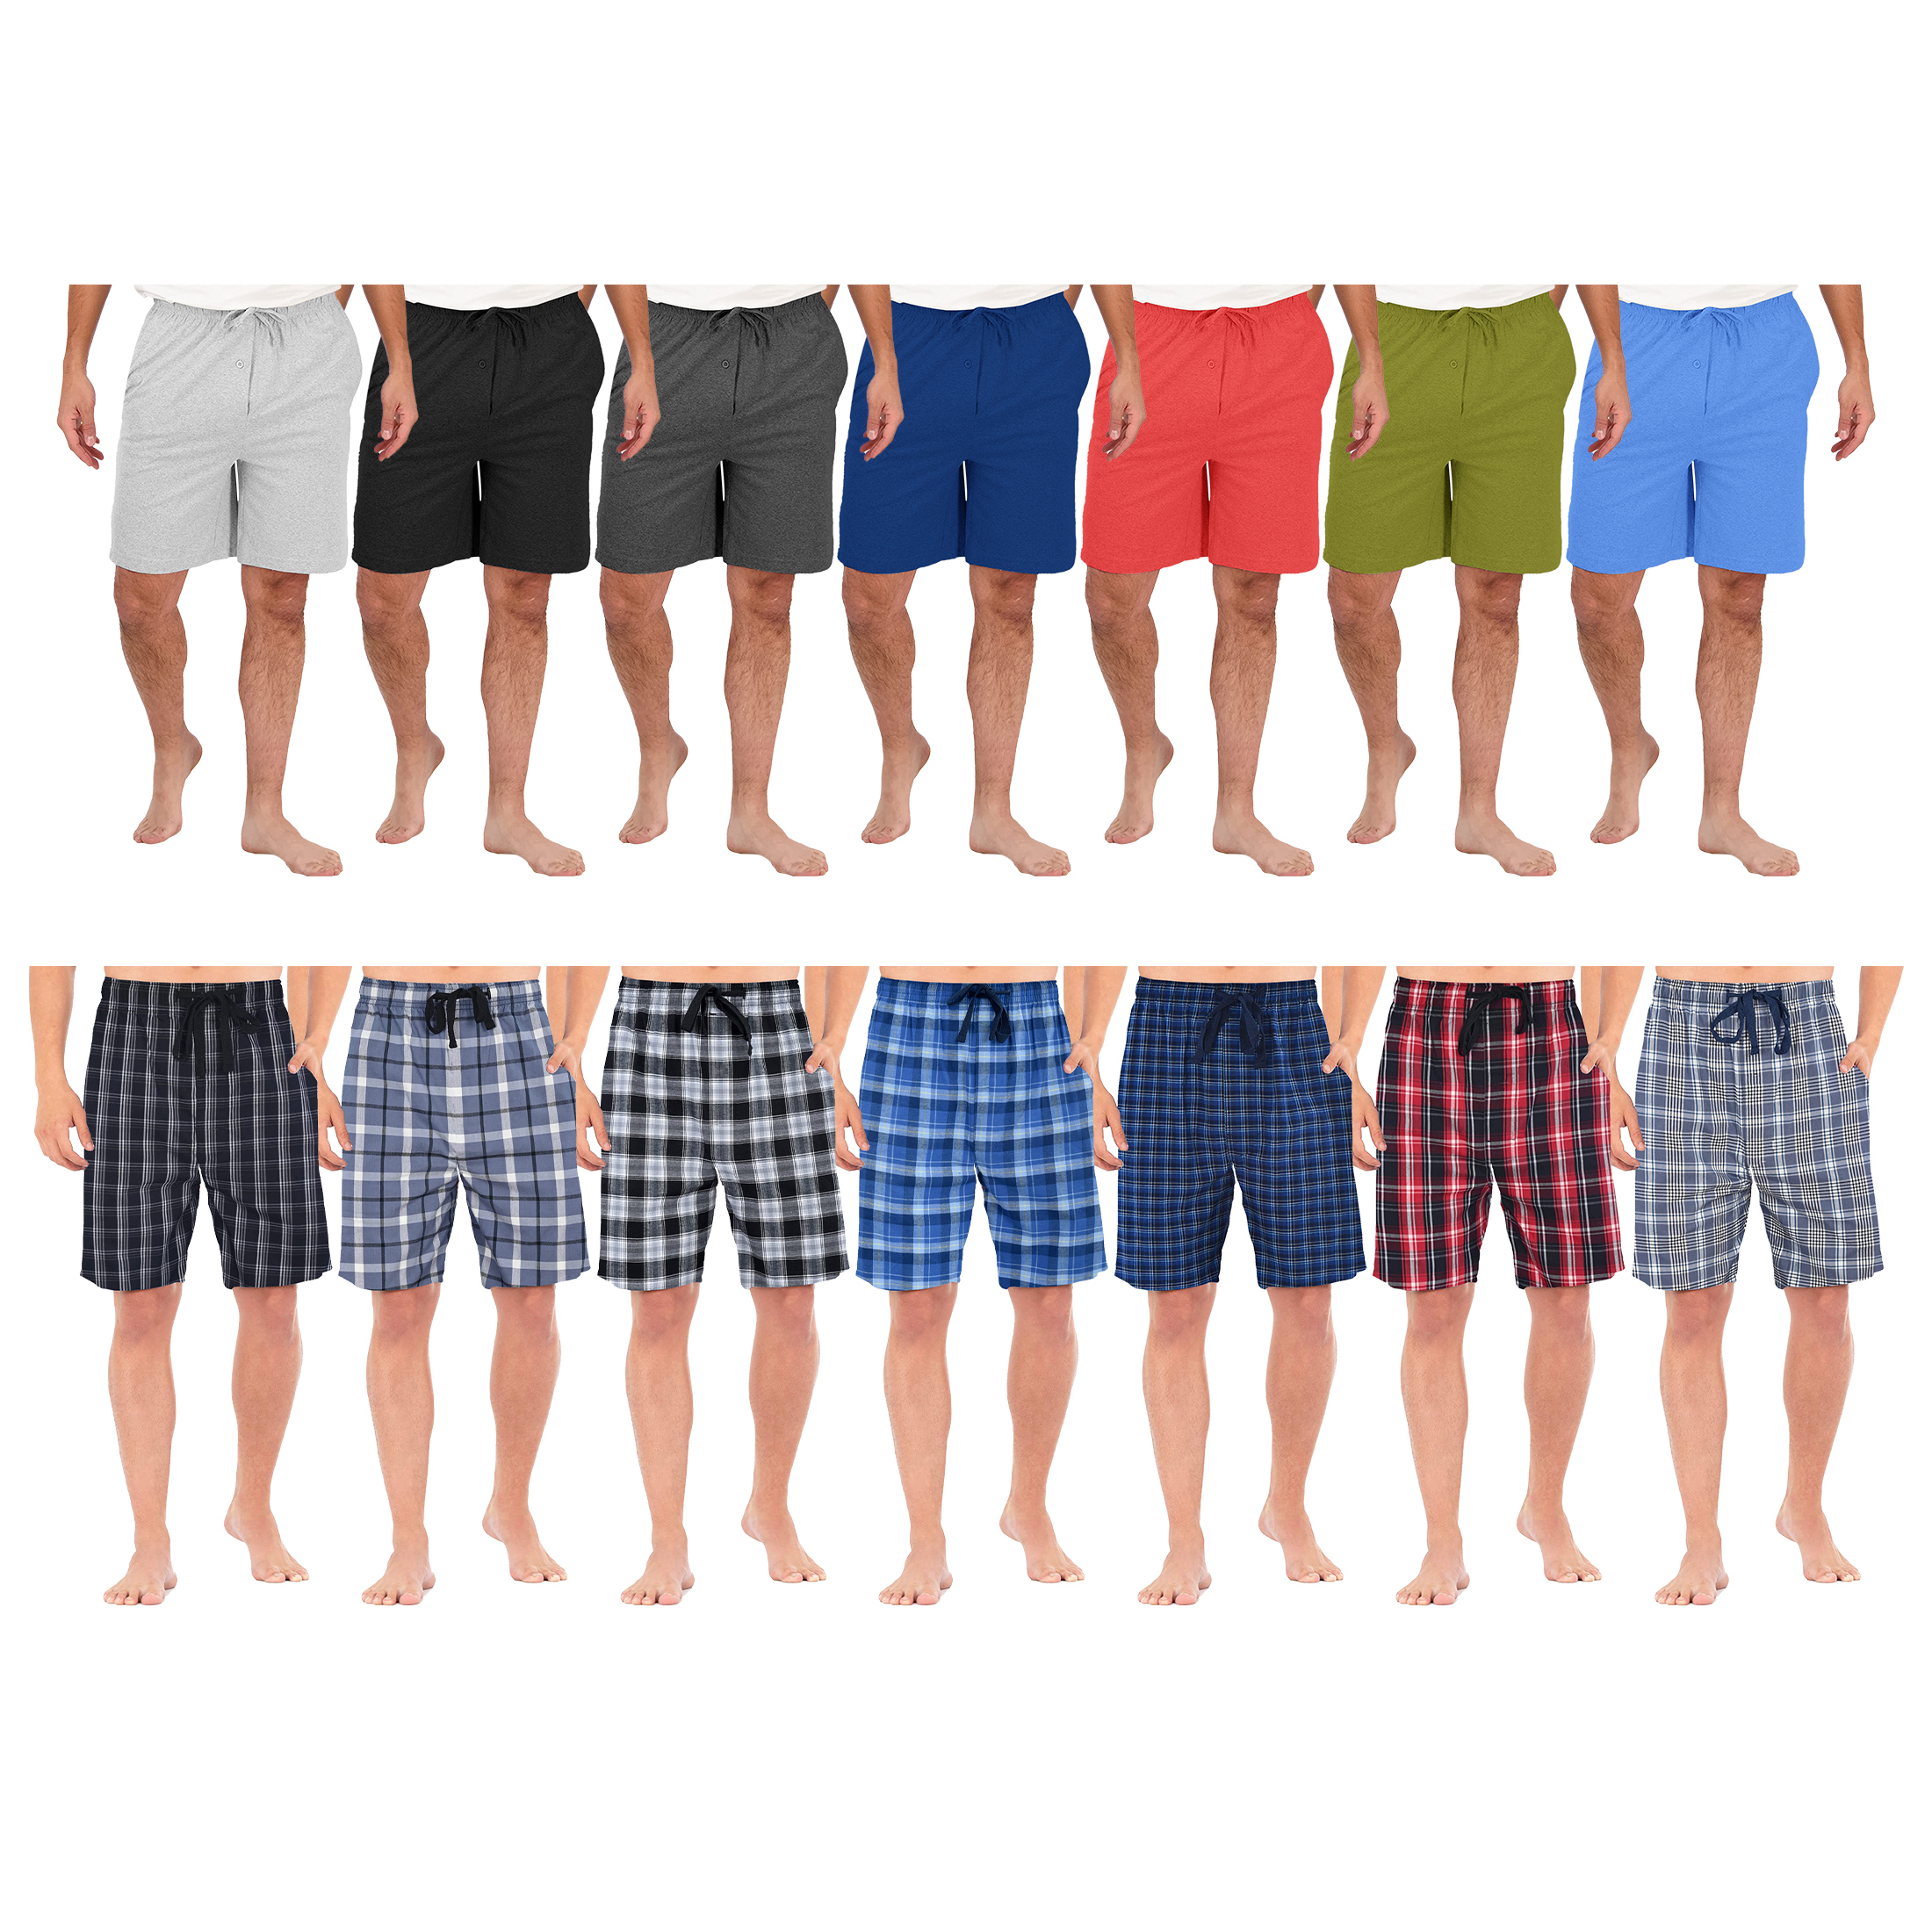 Multi-Pack: Men's Ultra-Soft Jersey Knit Sleep Lounge Pajama Shorts For Sleepwear - Solid, 3 Pack, X-Large